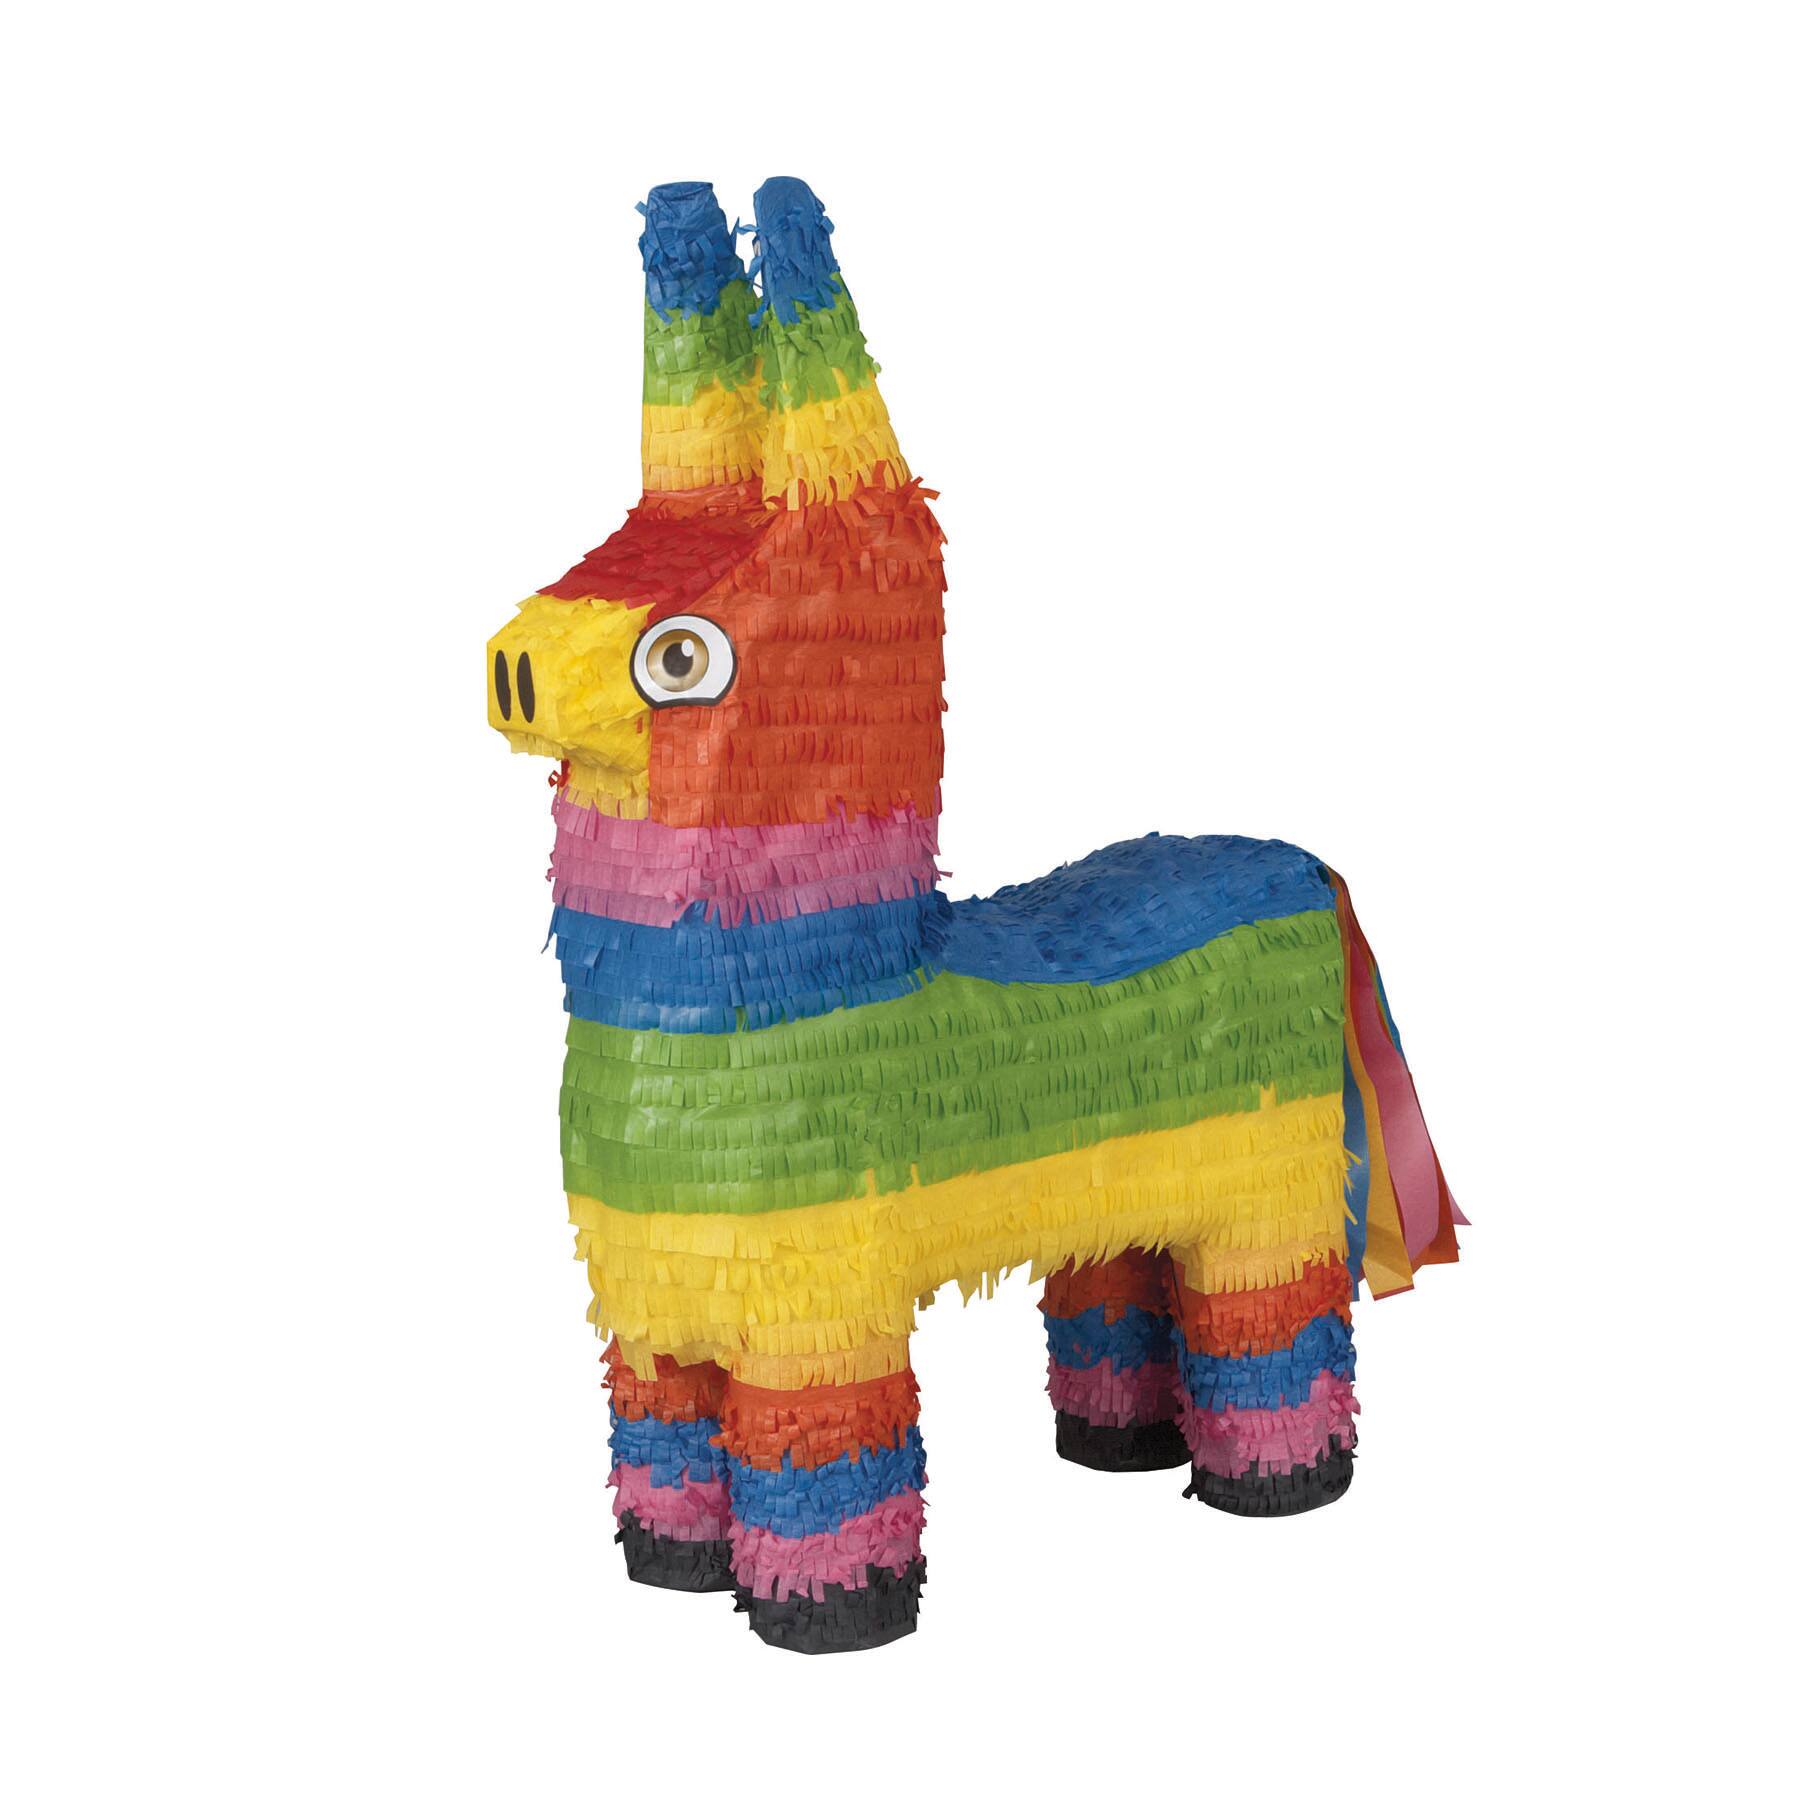 kaimei Donkey Pinata for Kids Birthday Anniversary Celebration Decorations Gaming Theme Pet Party Cinco de Mayo Fiesta Supplies with Stick Confetti Multicolored